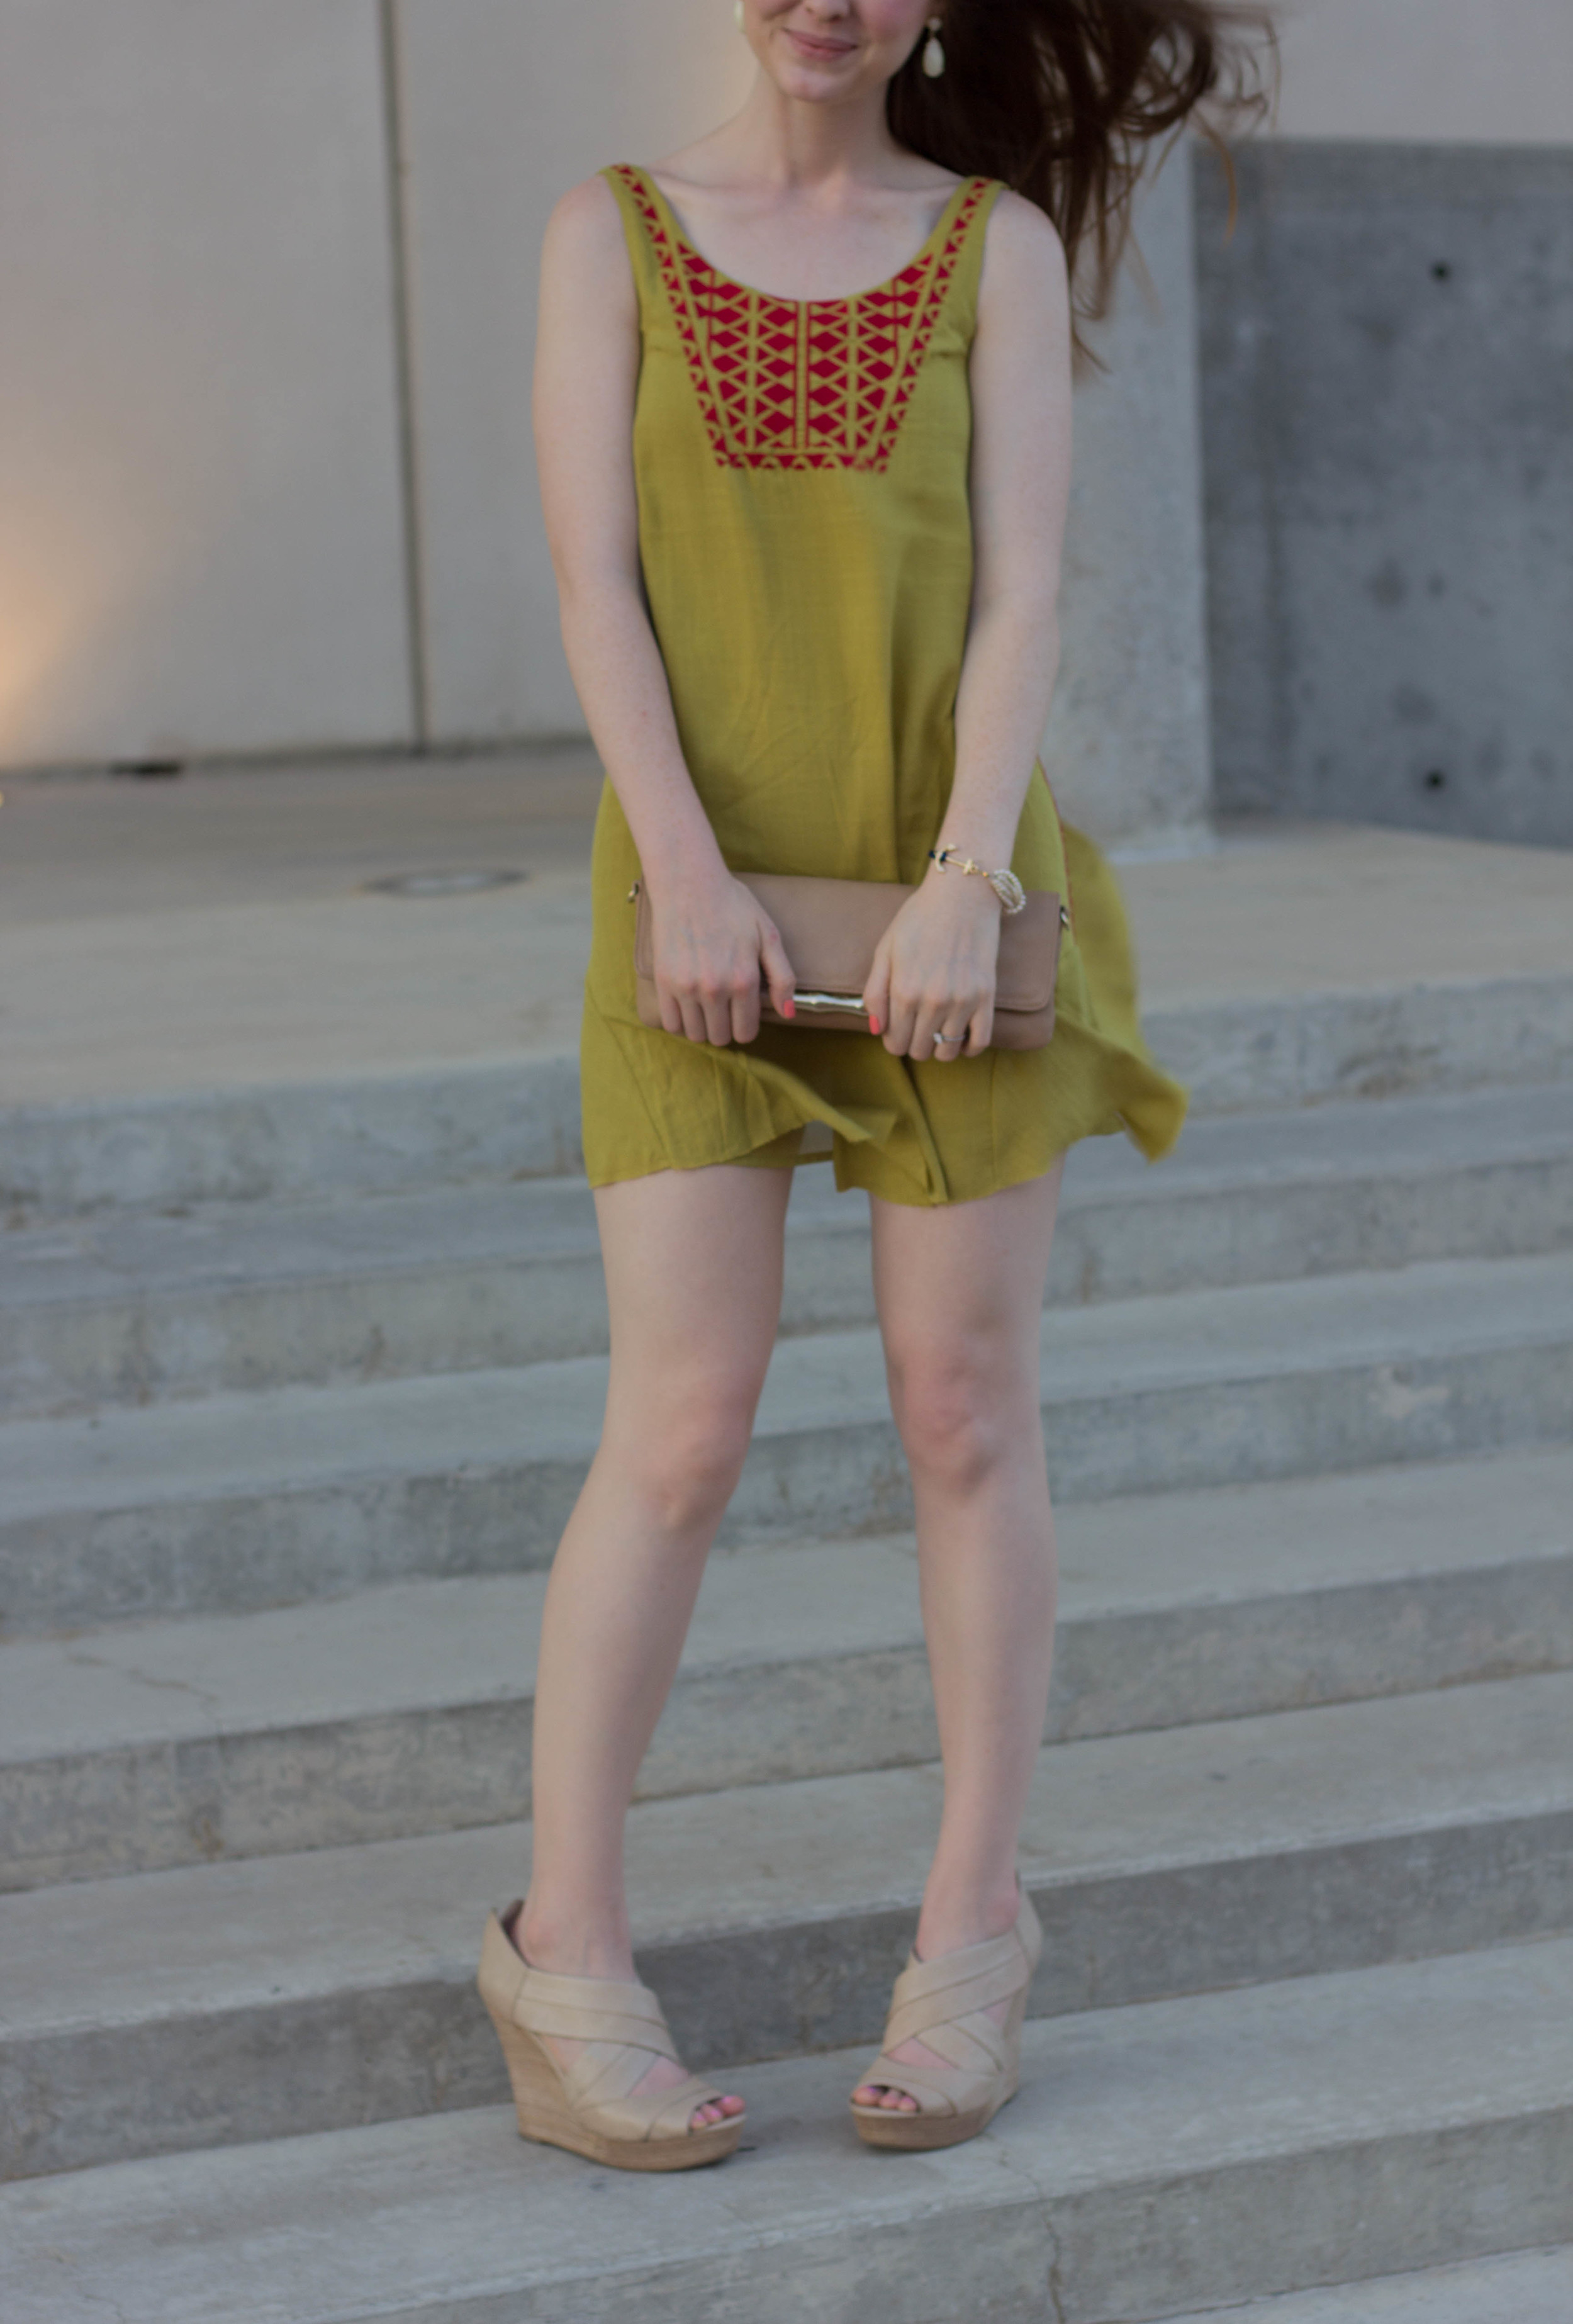 thml embroidered dress, embroidery, chartreuse, seychelles nued wedges, elaine turner clutch, kendra scott earrings